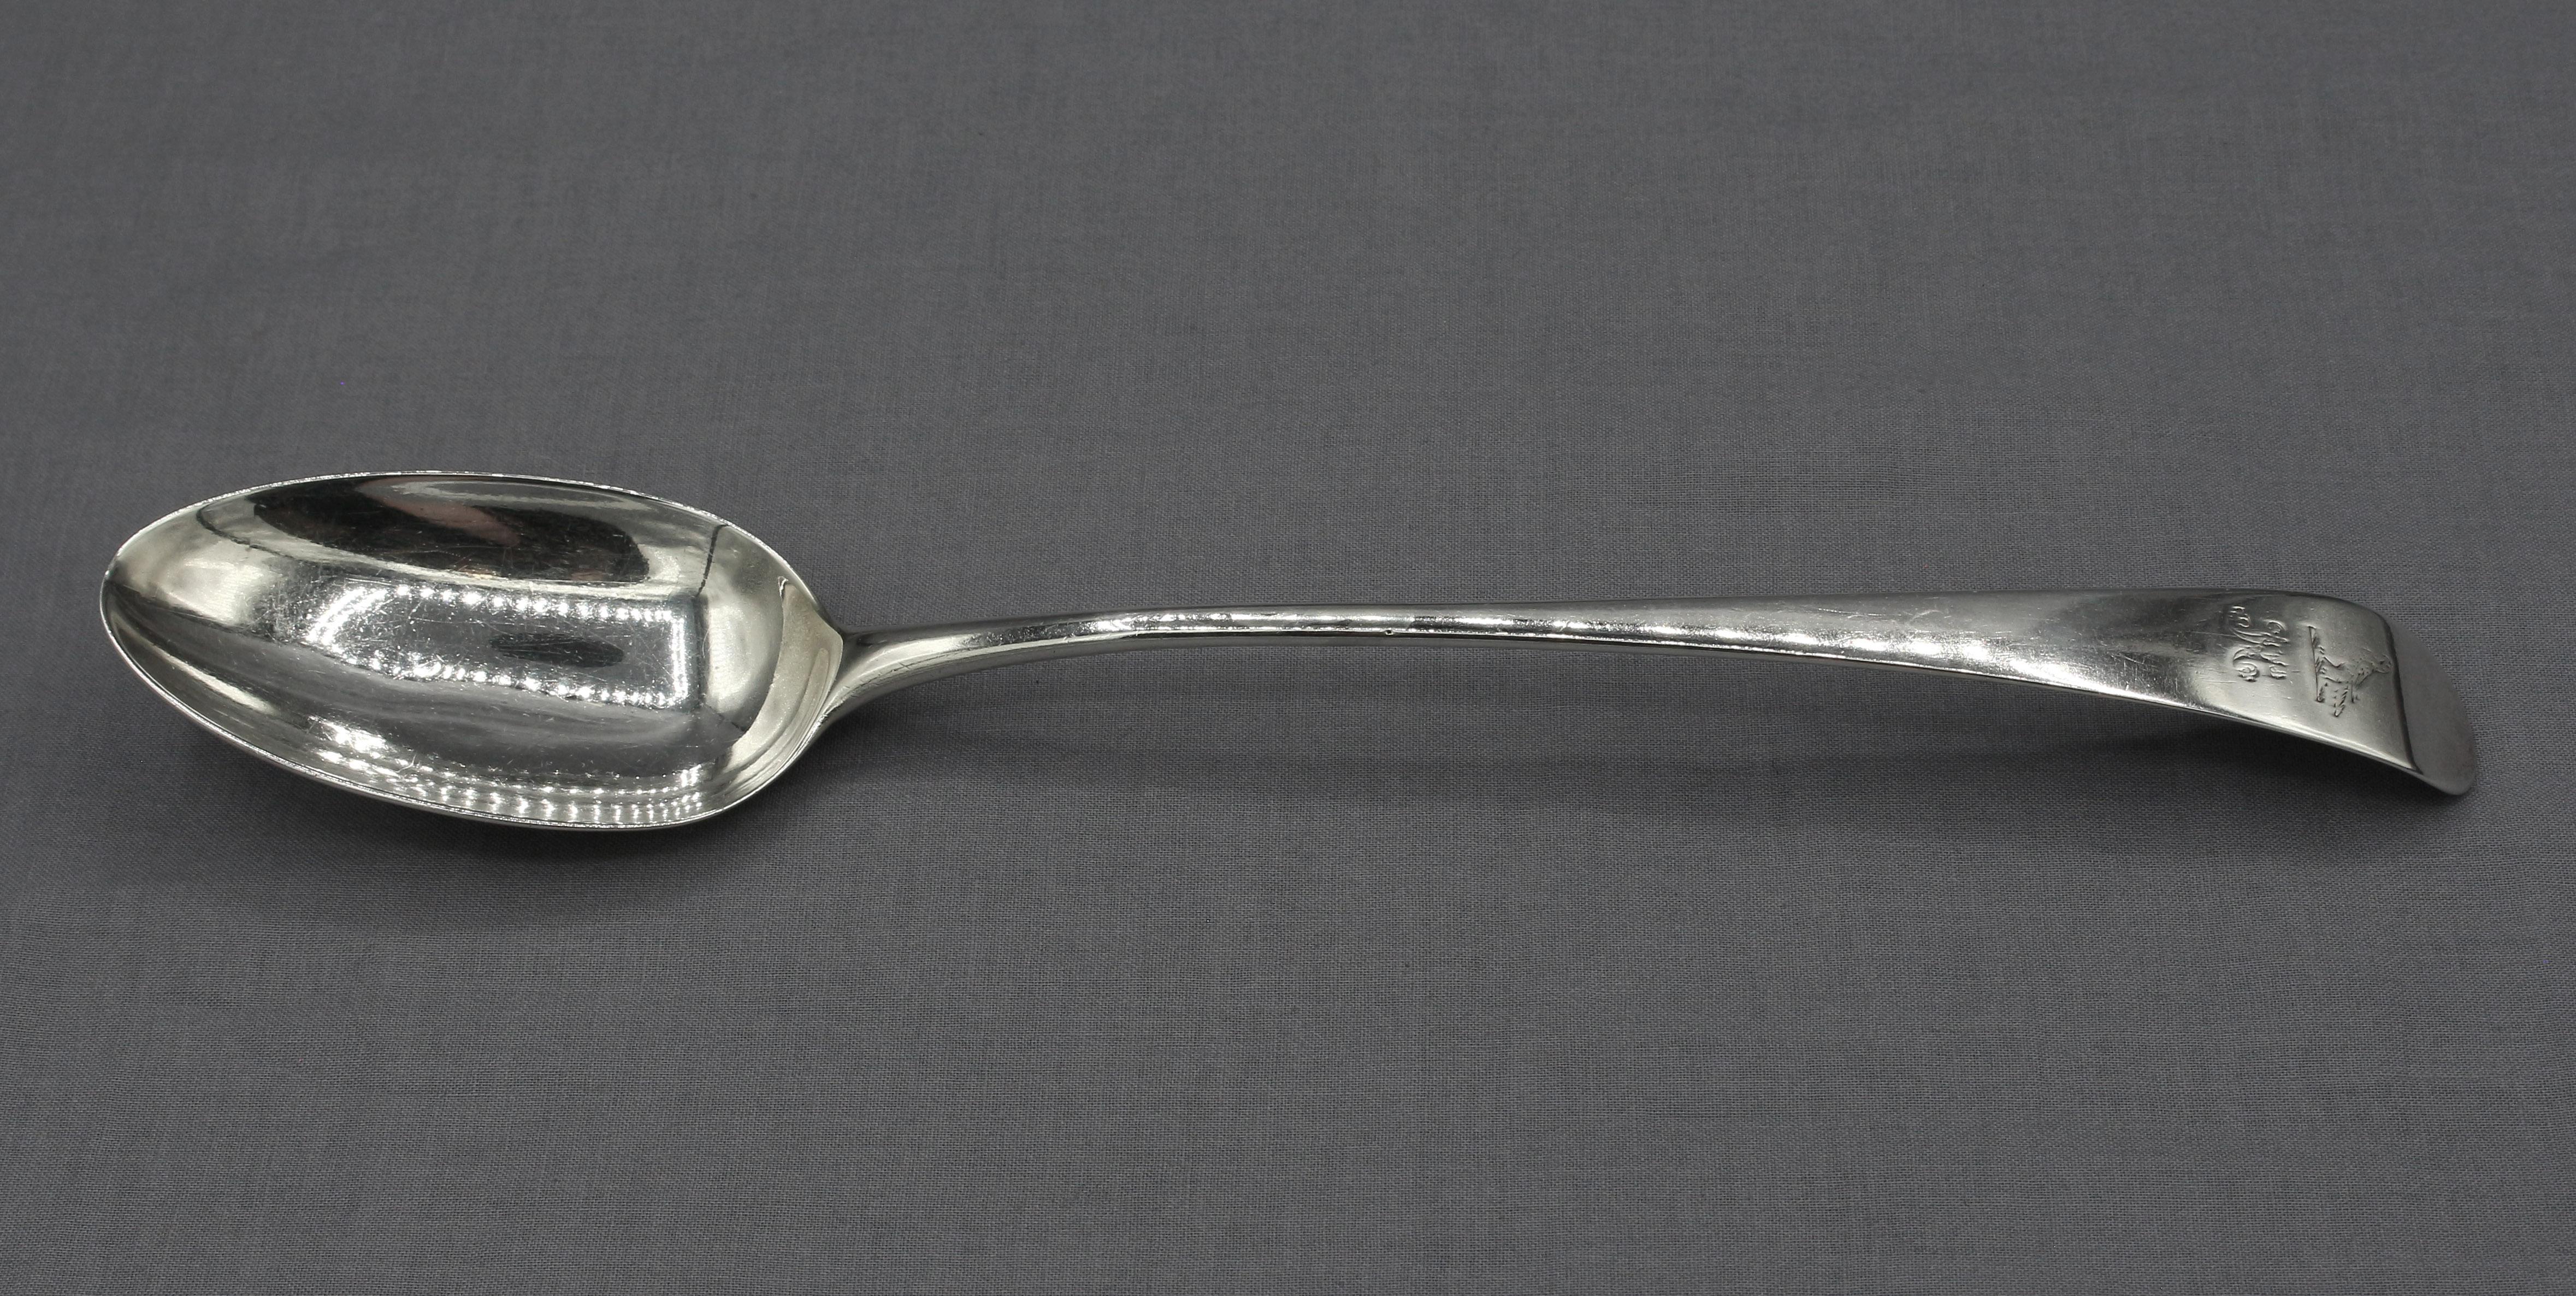 Sterling silver Old English basting spoon by Hester Bateman, 1785, London. Perhaps the most famous female silversmith for collectors. Family Crest of a hawk over a monogram (indistinct from wear). Very nice condition with wear on monogram & crest.